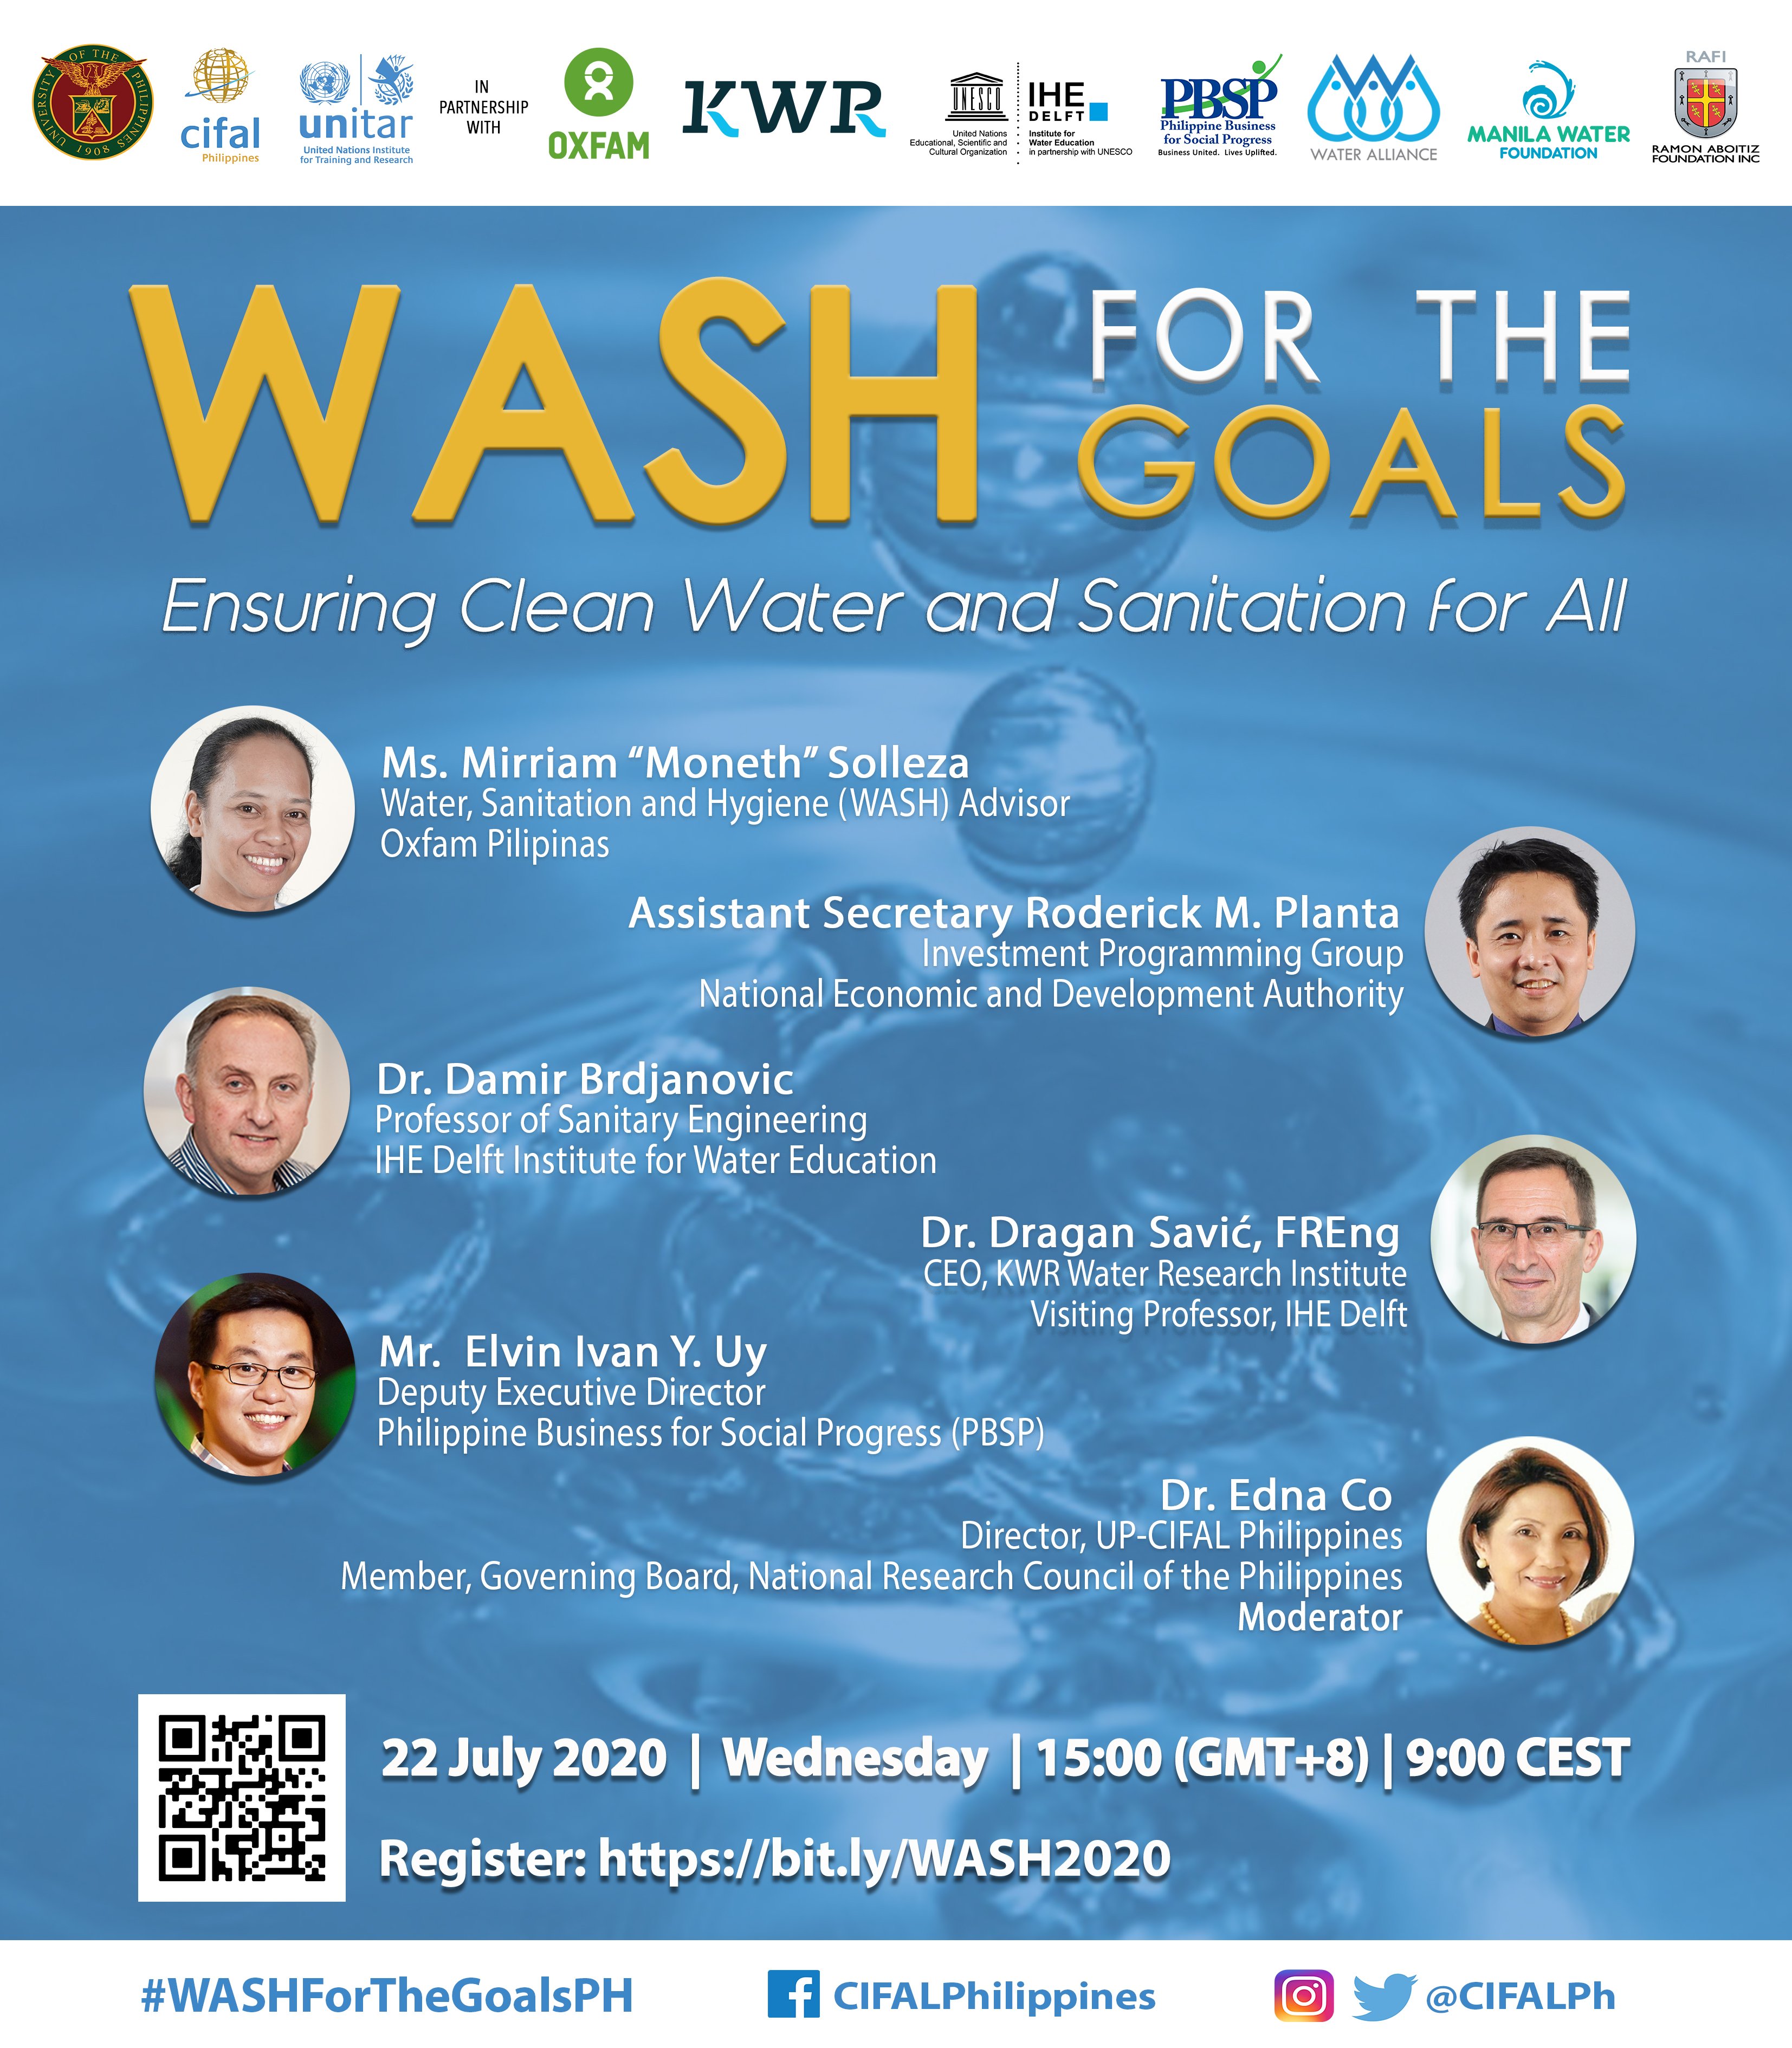 WEBINAR-WASH for the Goals: Ensuring Clean Water and Sanitation for All